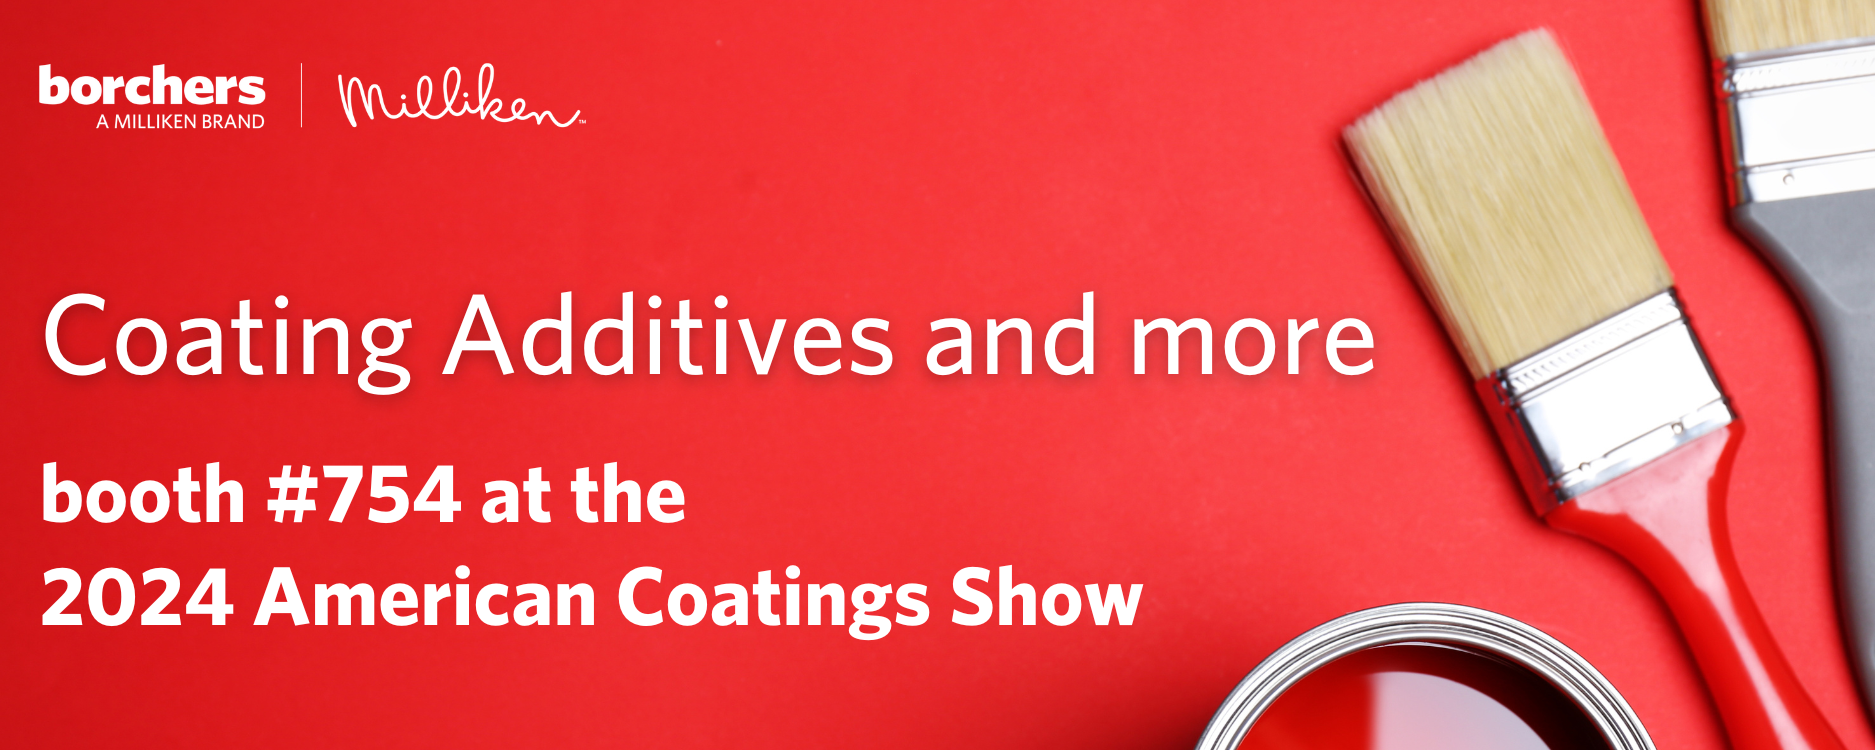 coating additives at the 2024 American Coatings Show